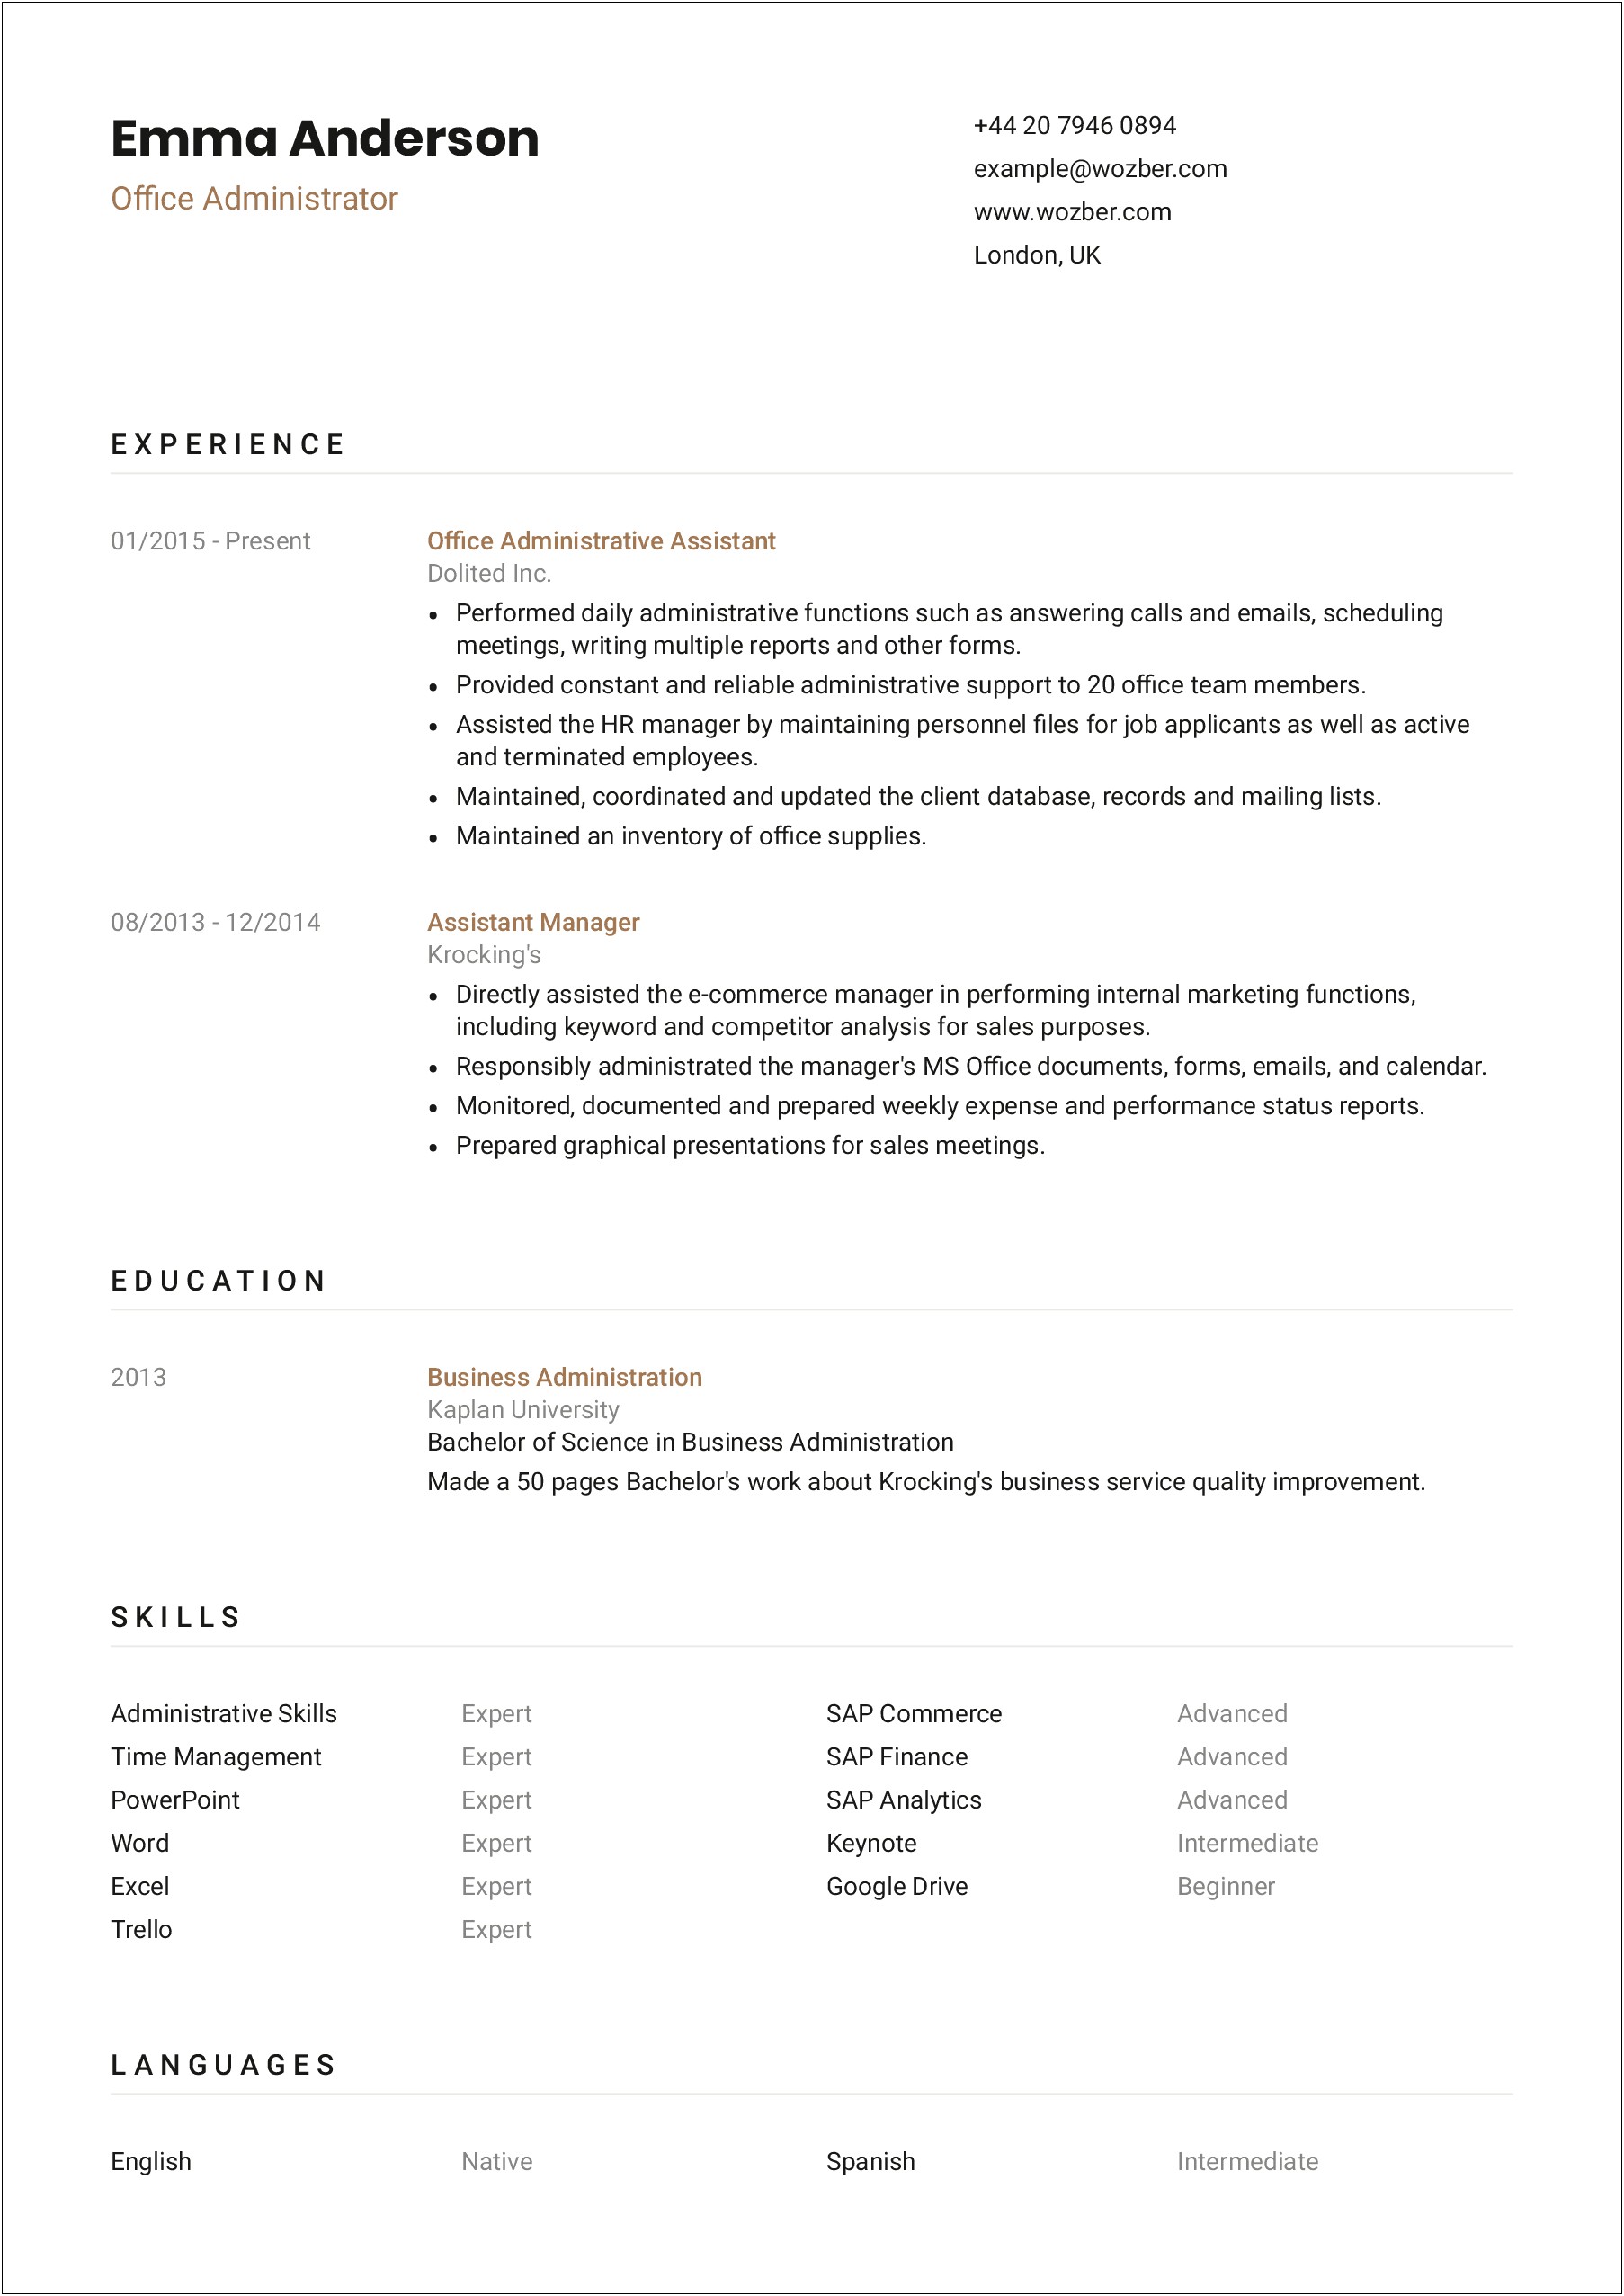 Examples Of Emails To Use On Resume